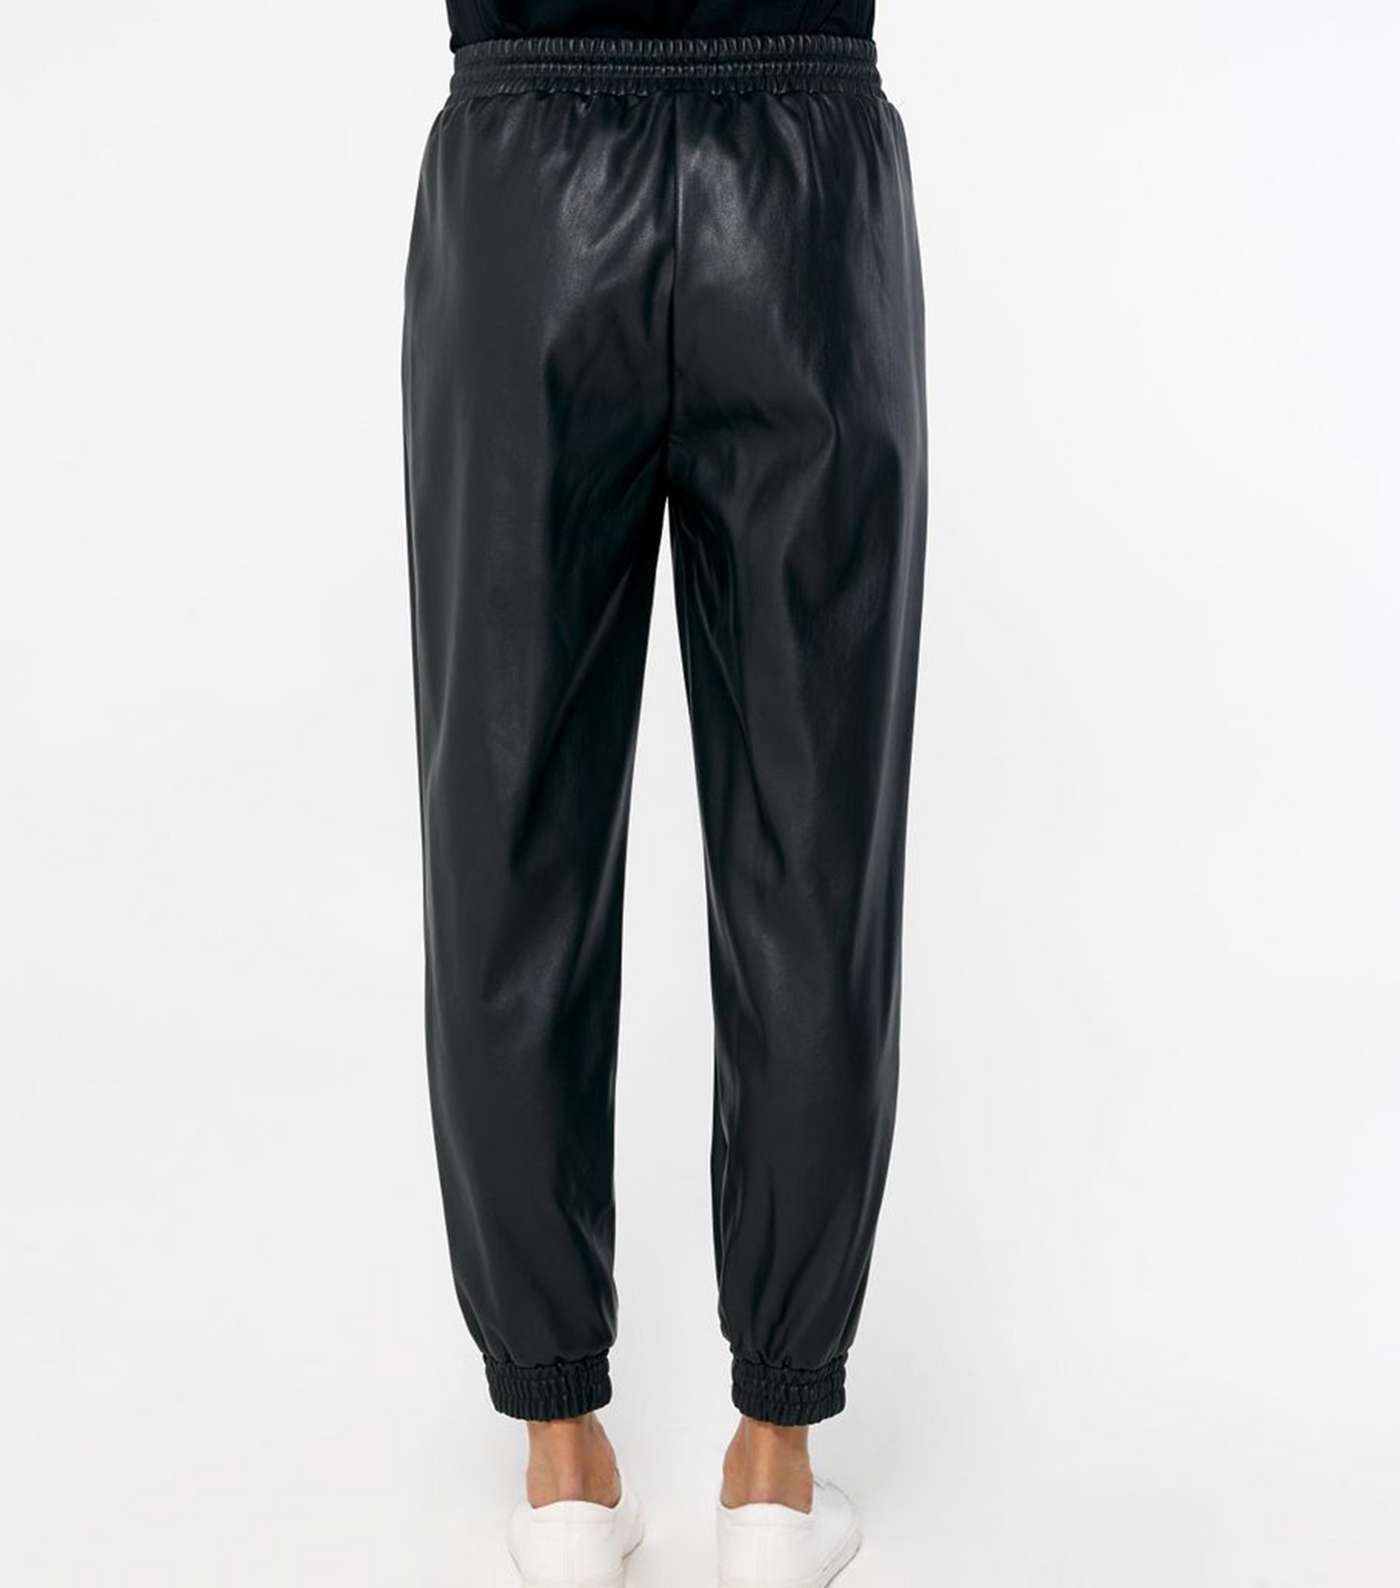 Black Leather-Look Cuffed Joggers Image 3